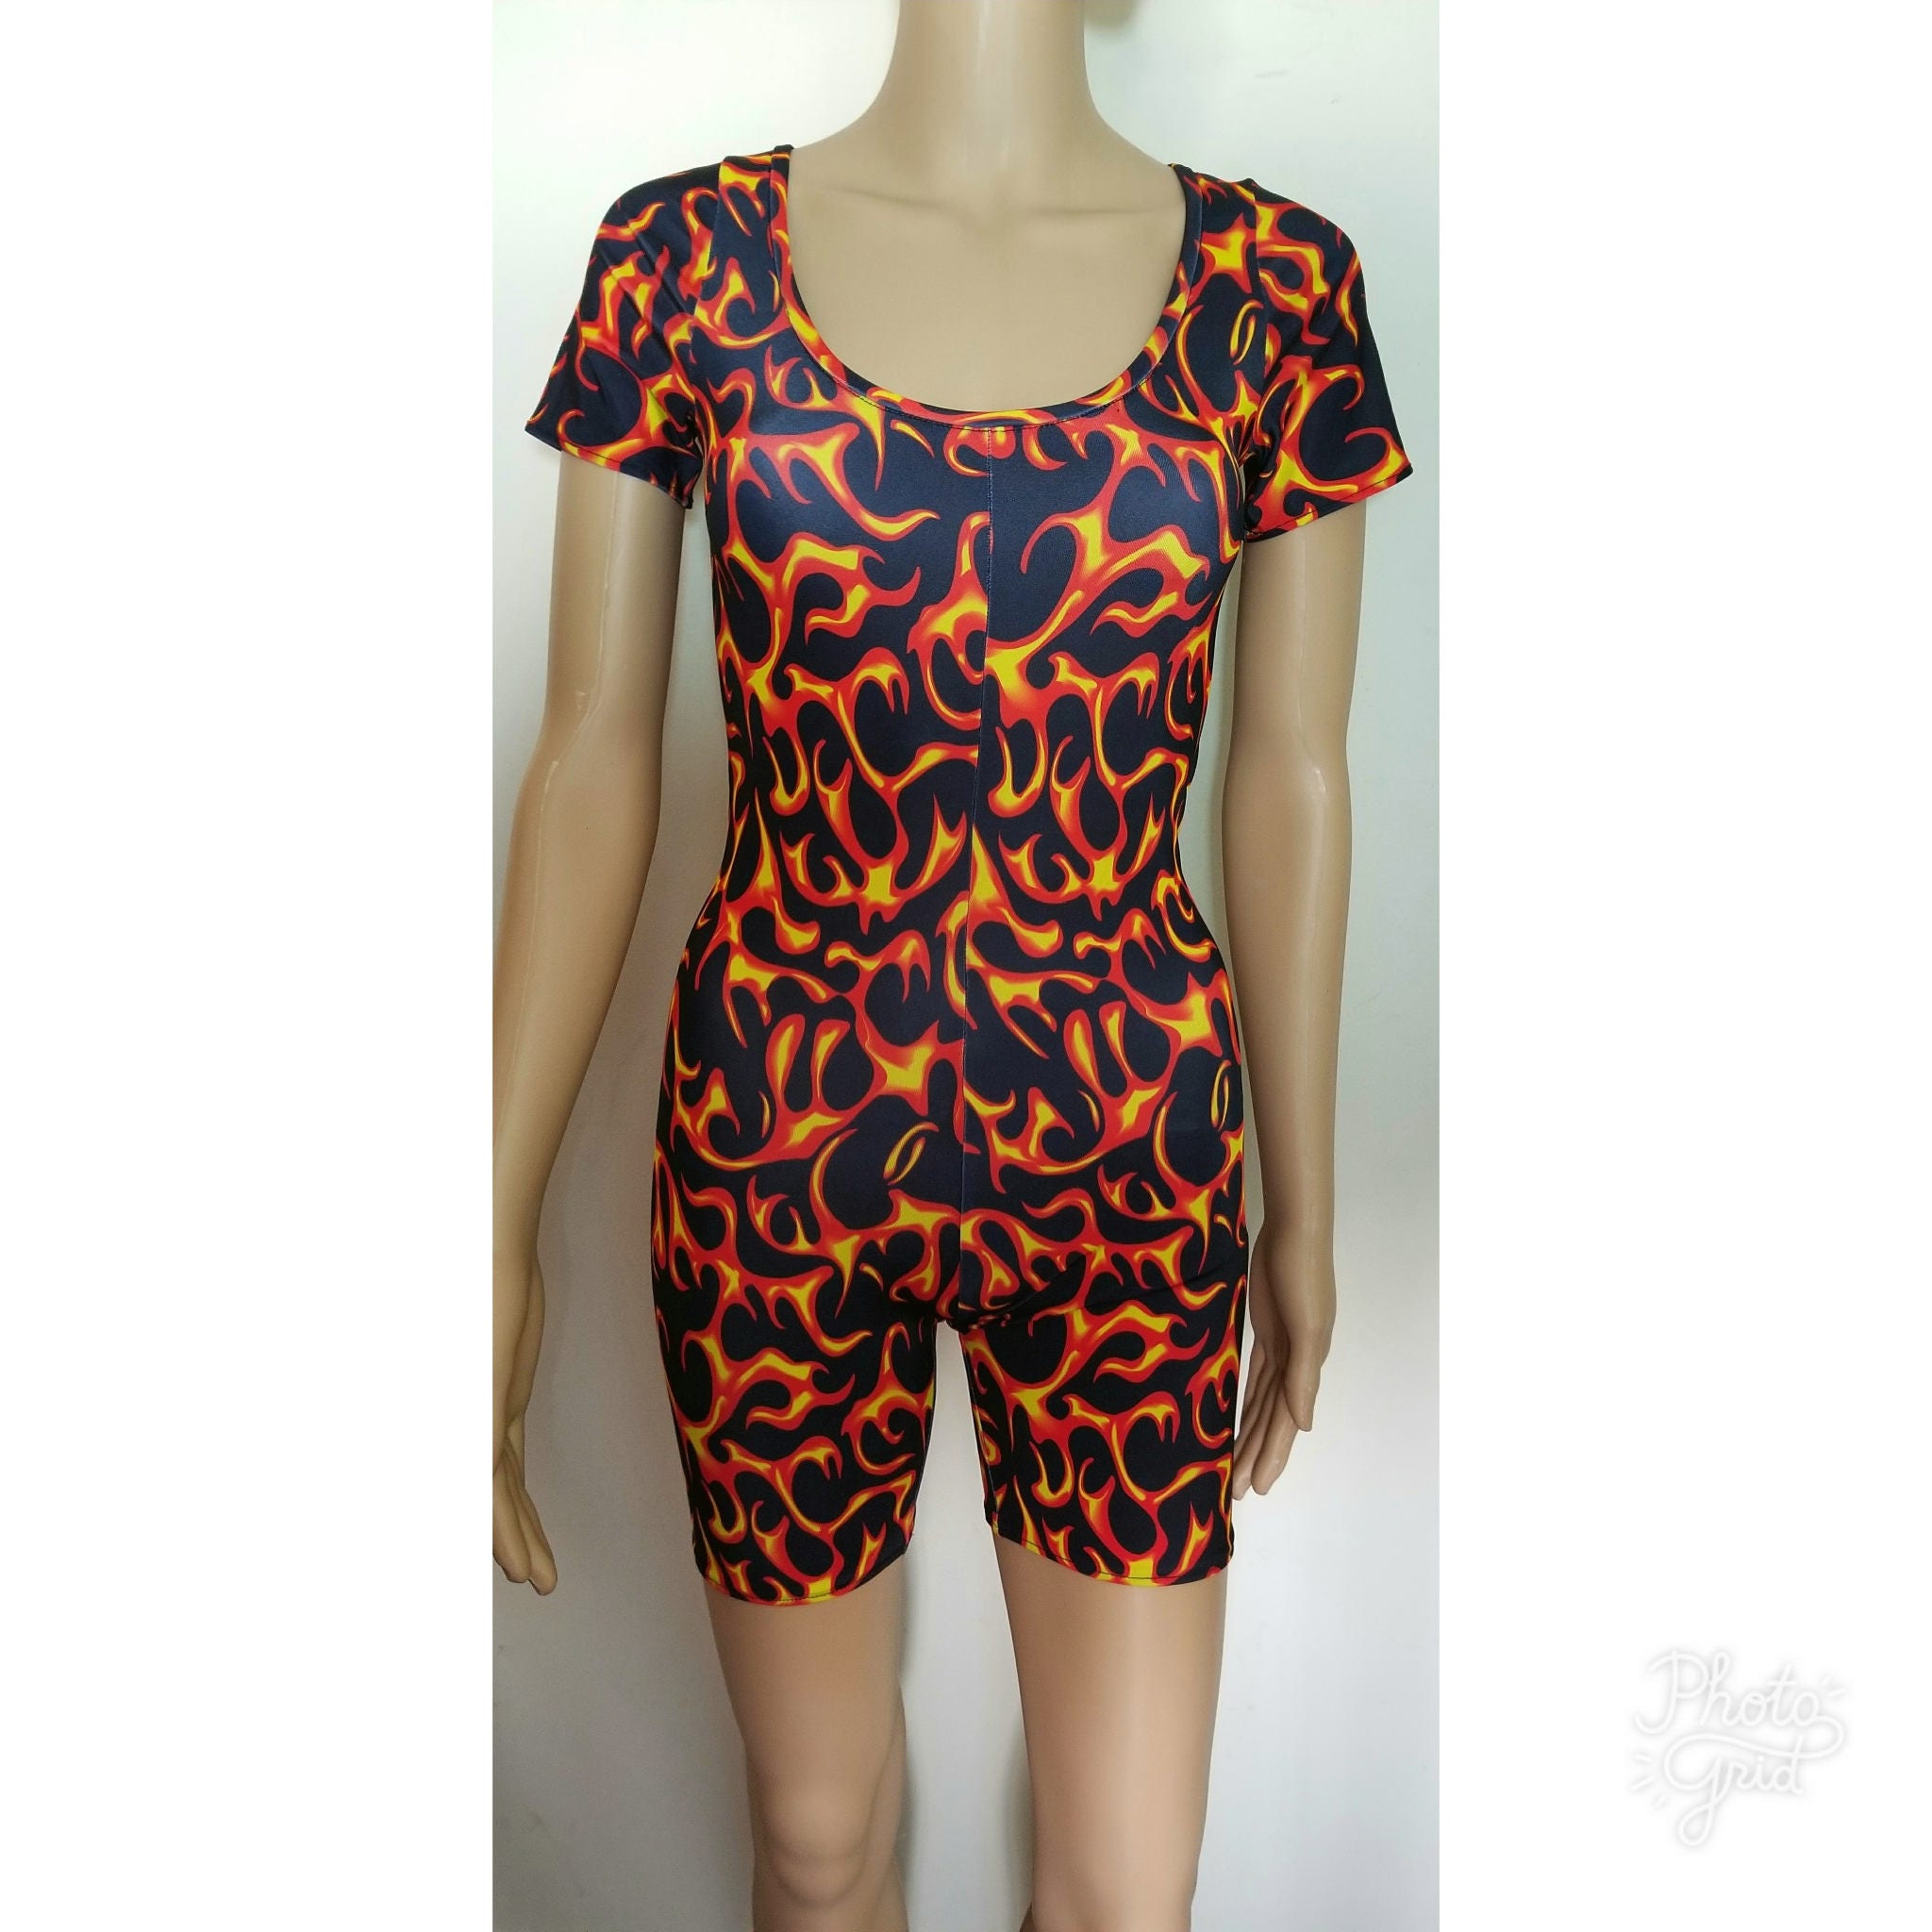 Fire flame print short catsuit/ bodysuit with short sleeves